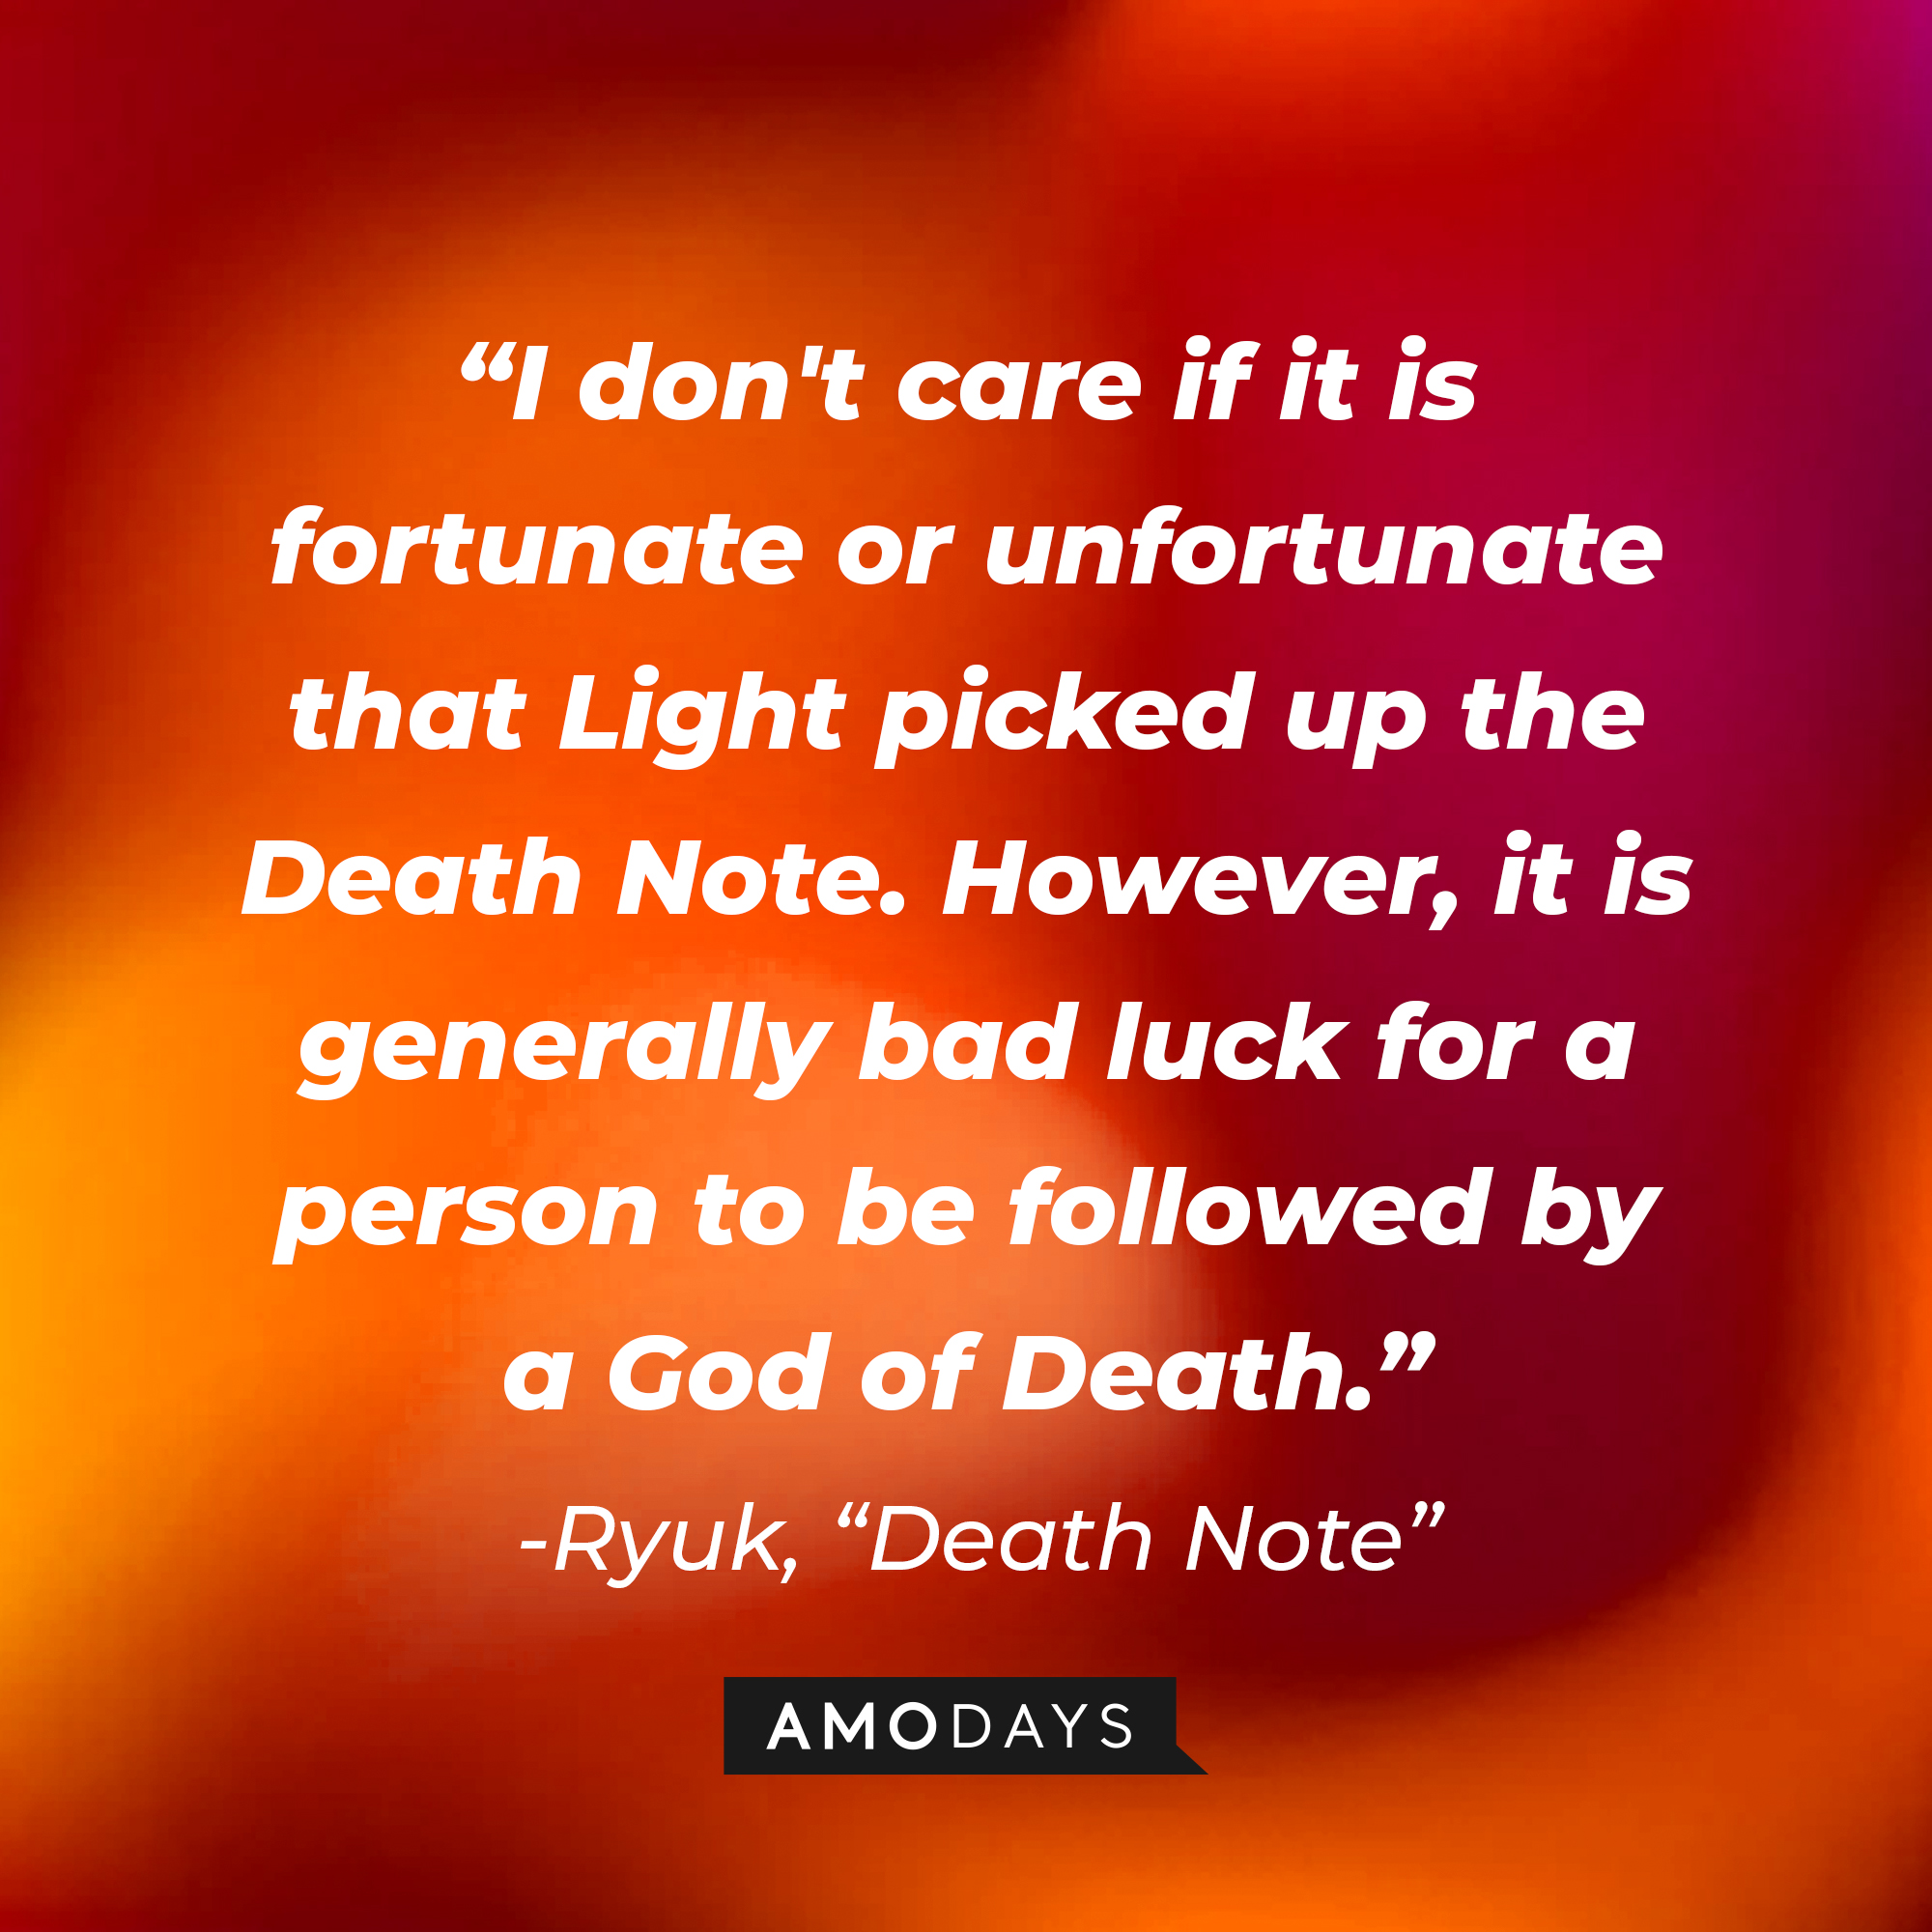 Ryuk's quote from "Death Note:" "I don't care if it is fortunate or unfortunate that Light picked up the Death Note. However, it is generally bad luck for a person to be followed by a God of Death." | Source: AmoDays